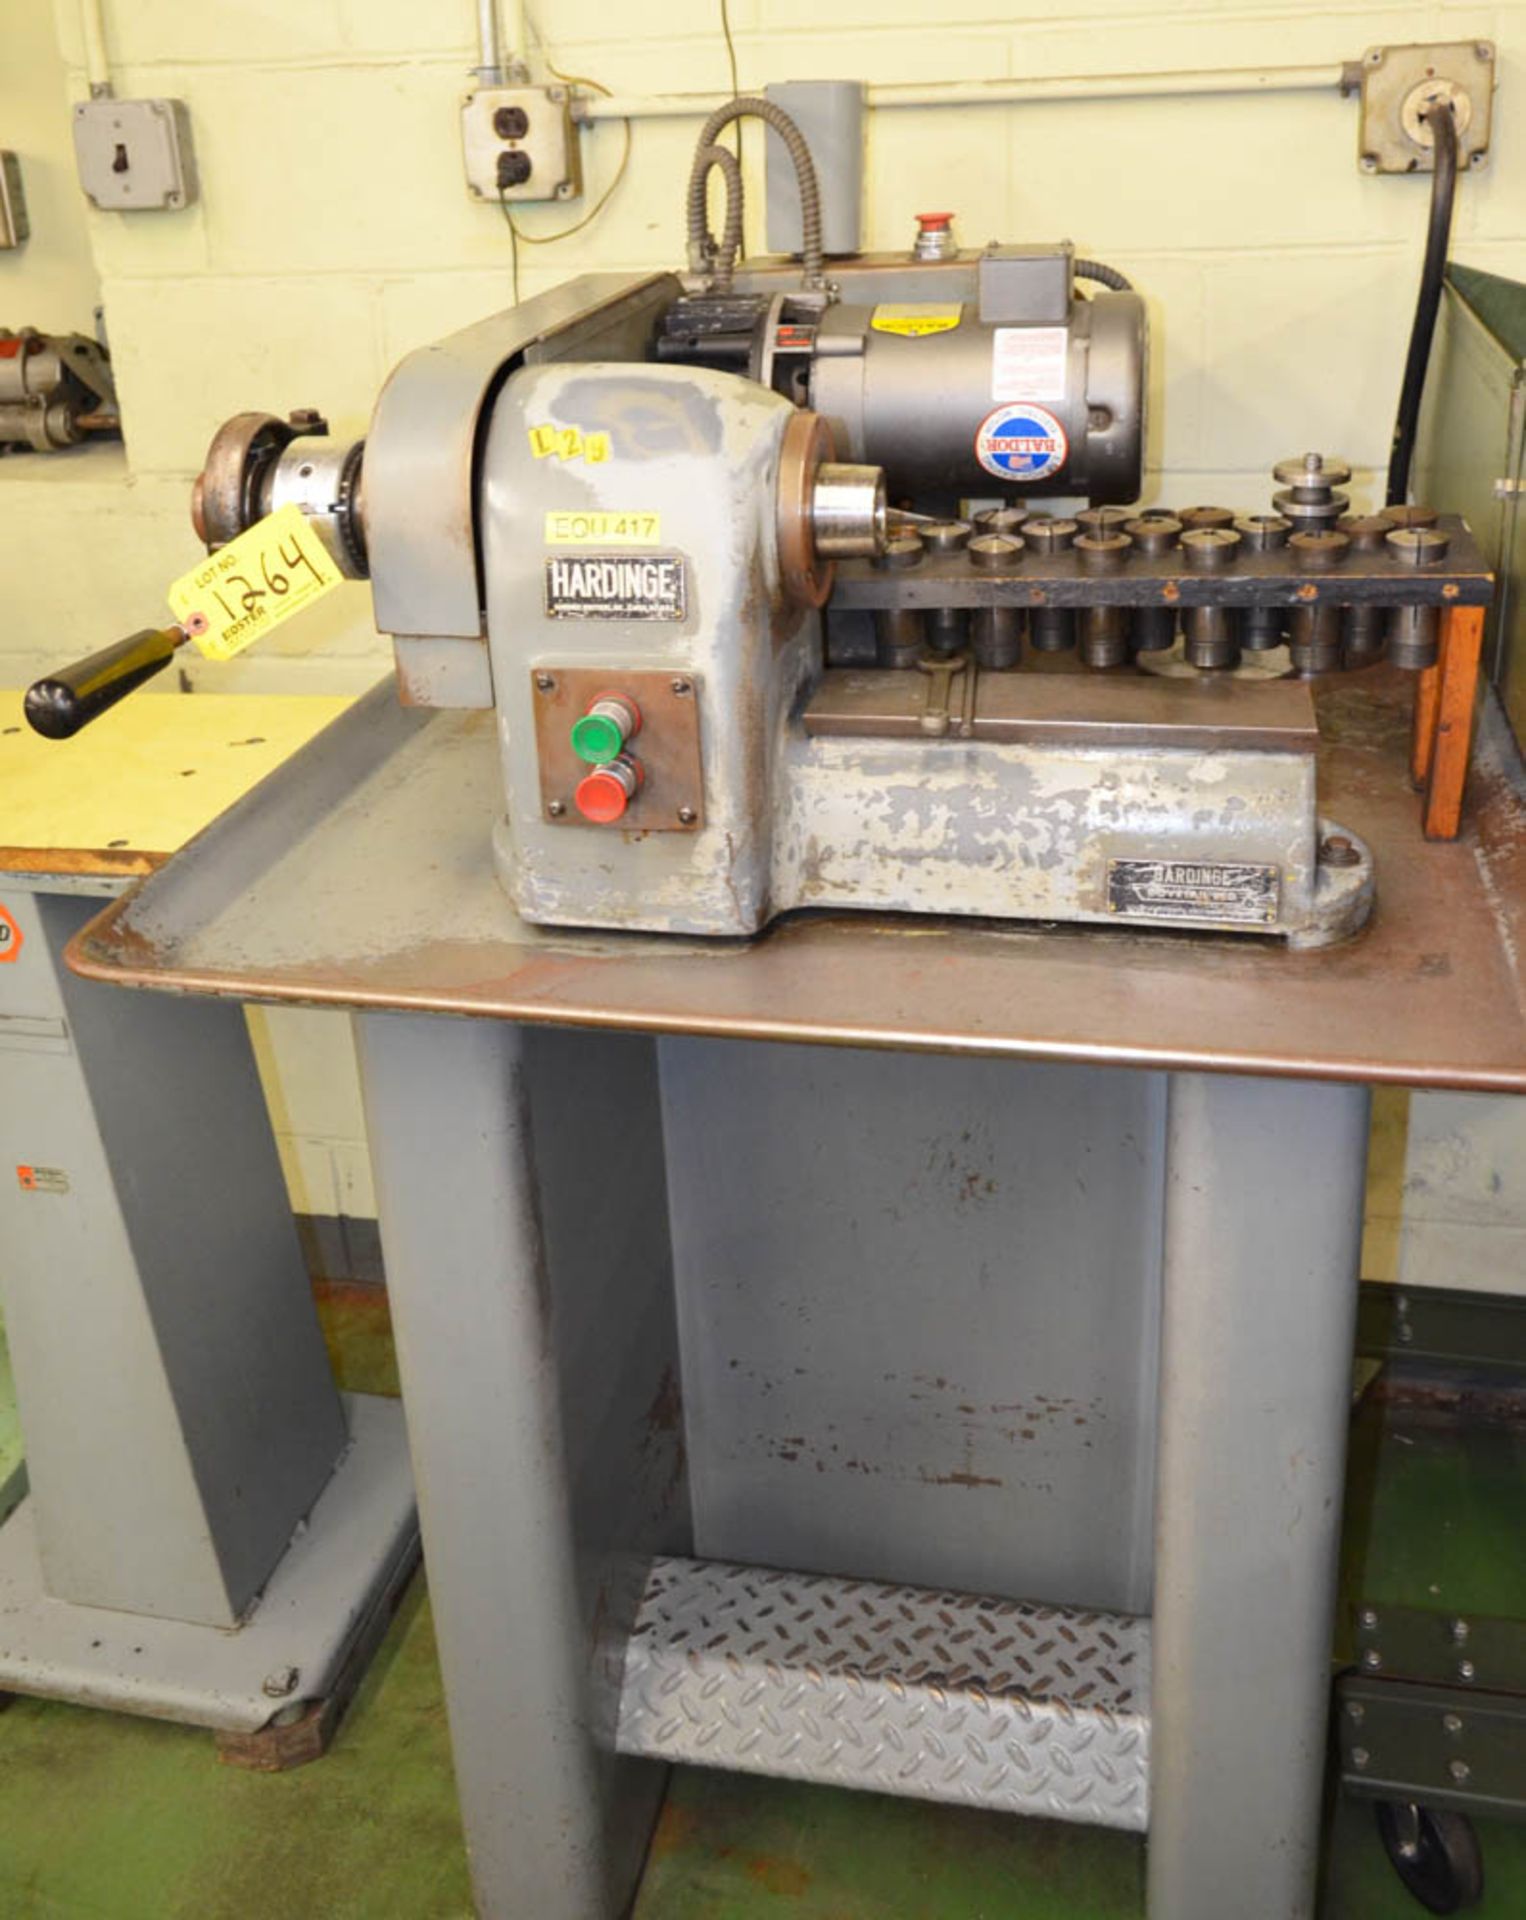 HARDINGE SPEED LATHE, WITH COLLET CLOSER, ASSORTED 5C COLLETS - Image 2 of 2